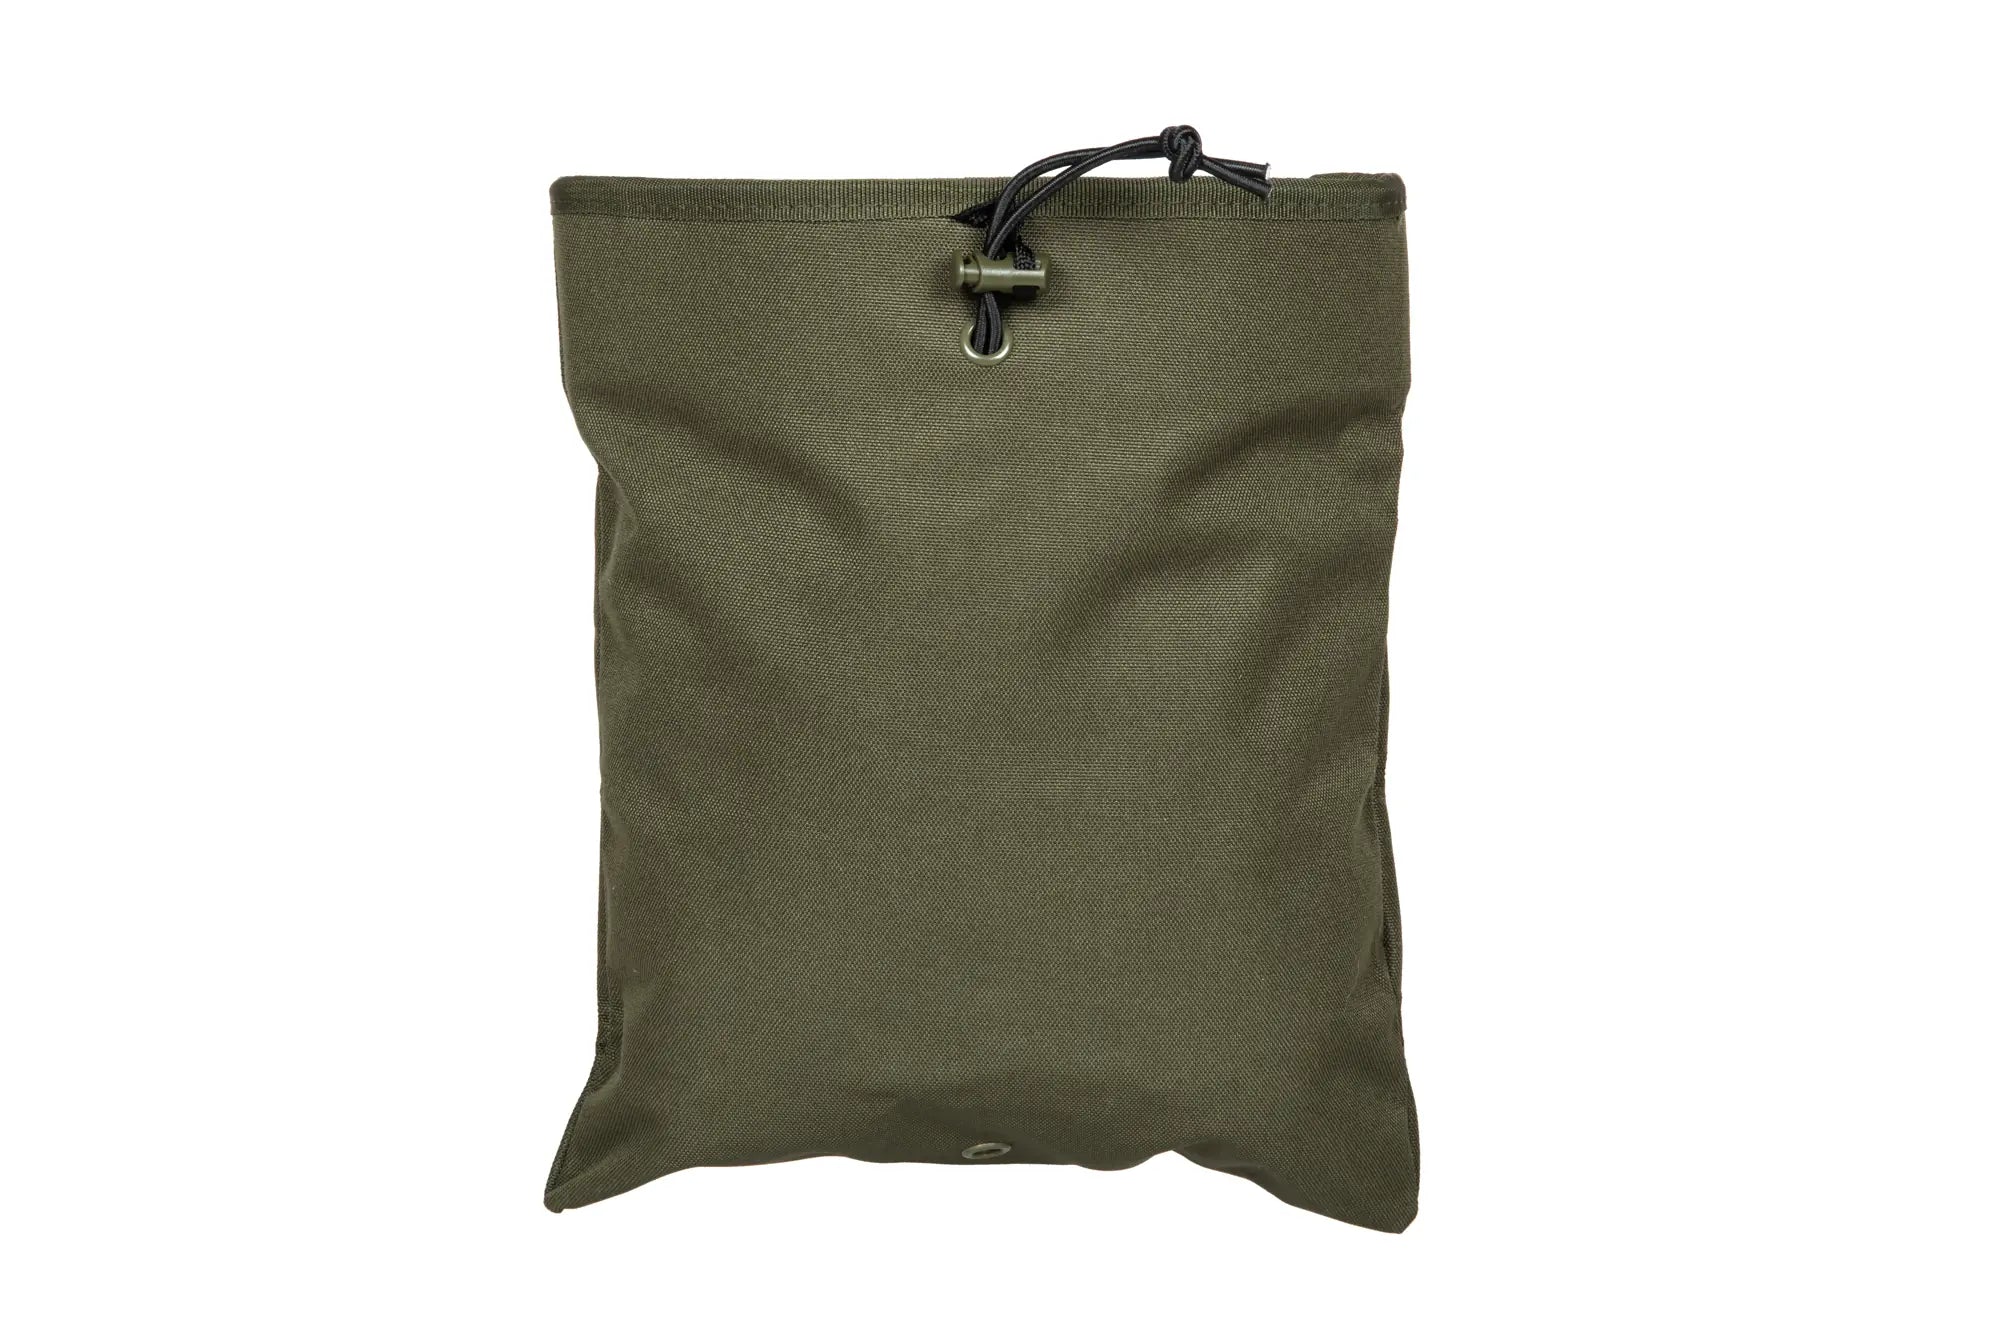 Dump Pouch for Magazines - Olive-1